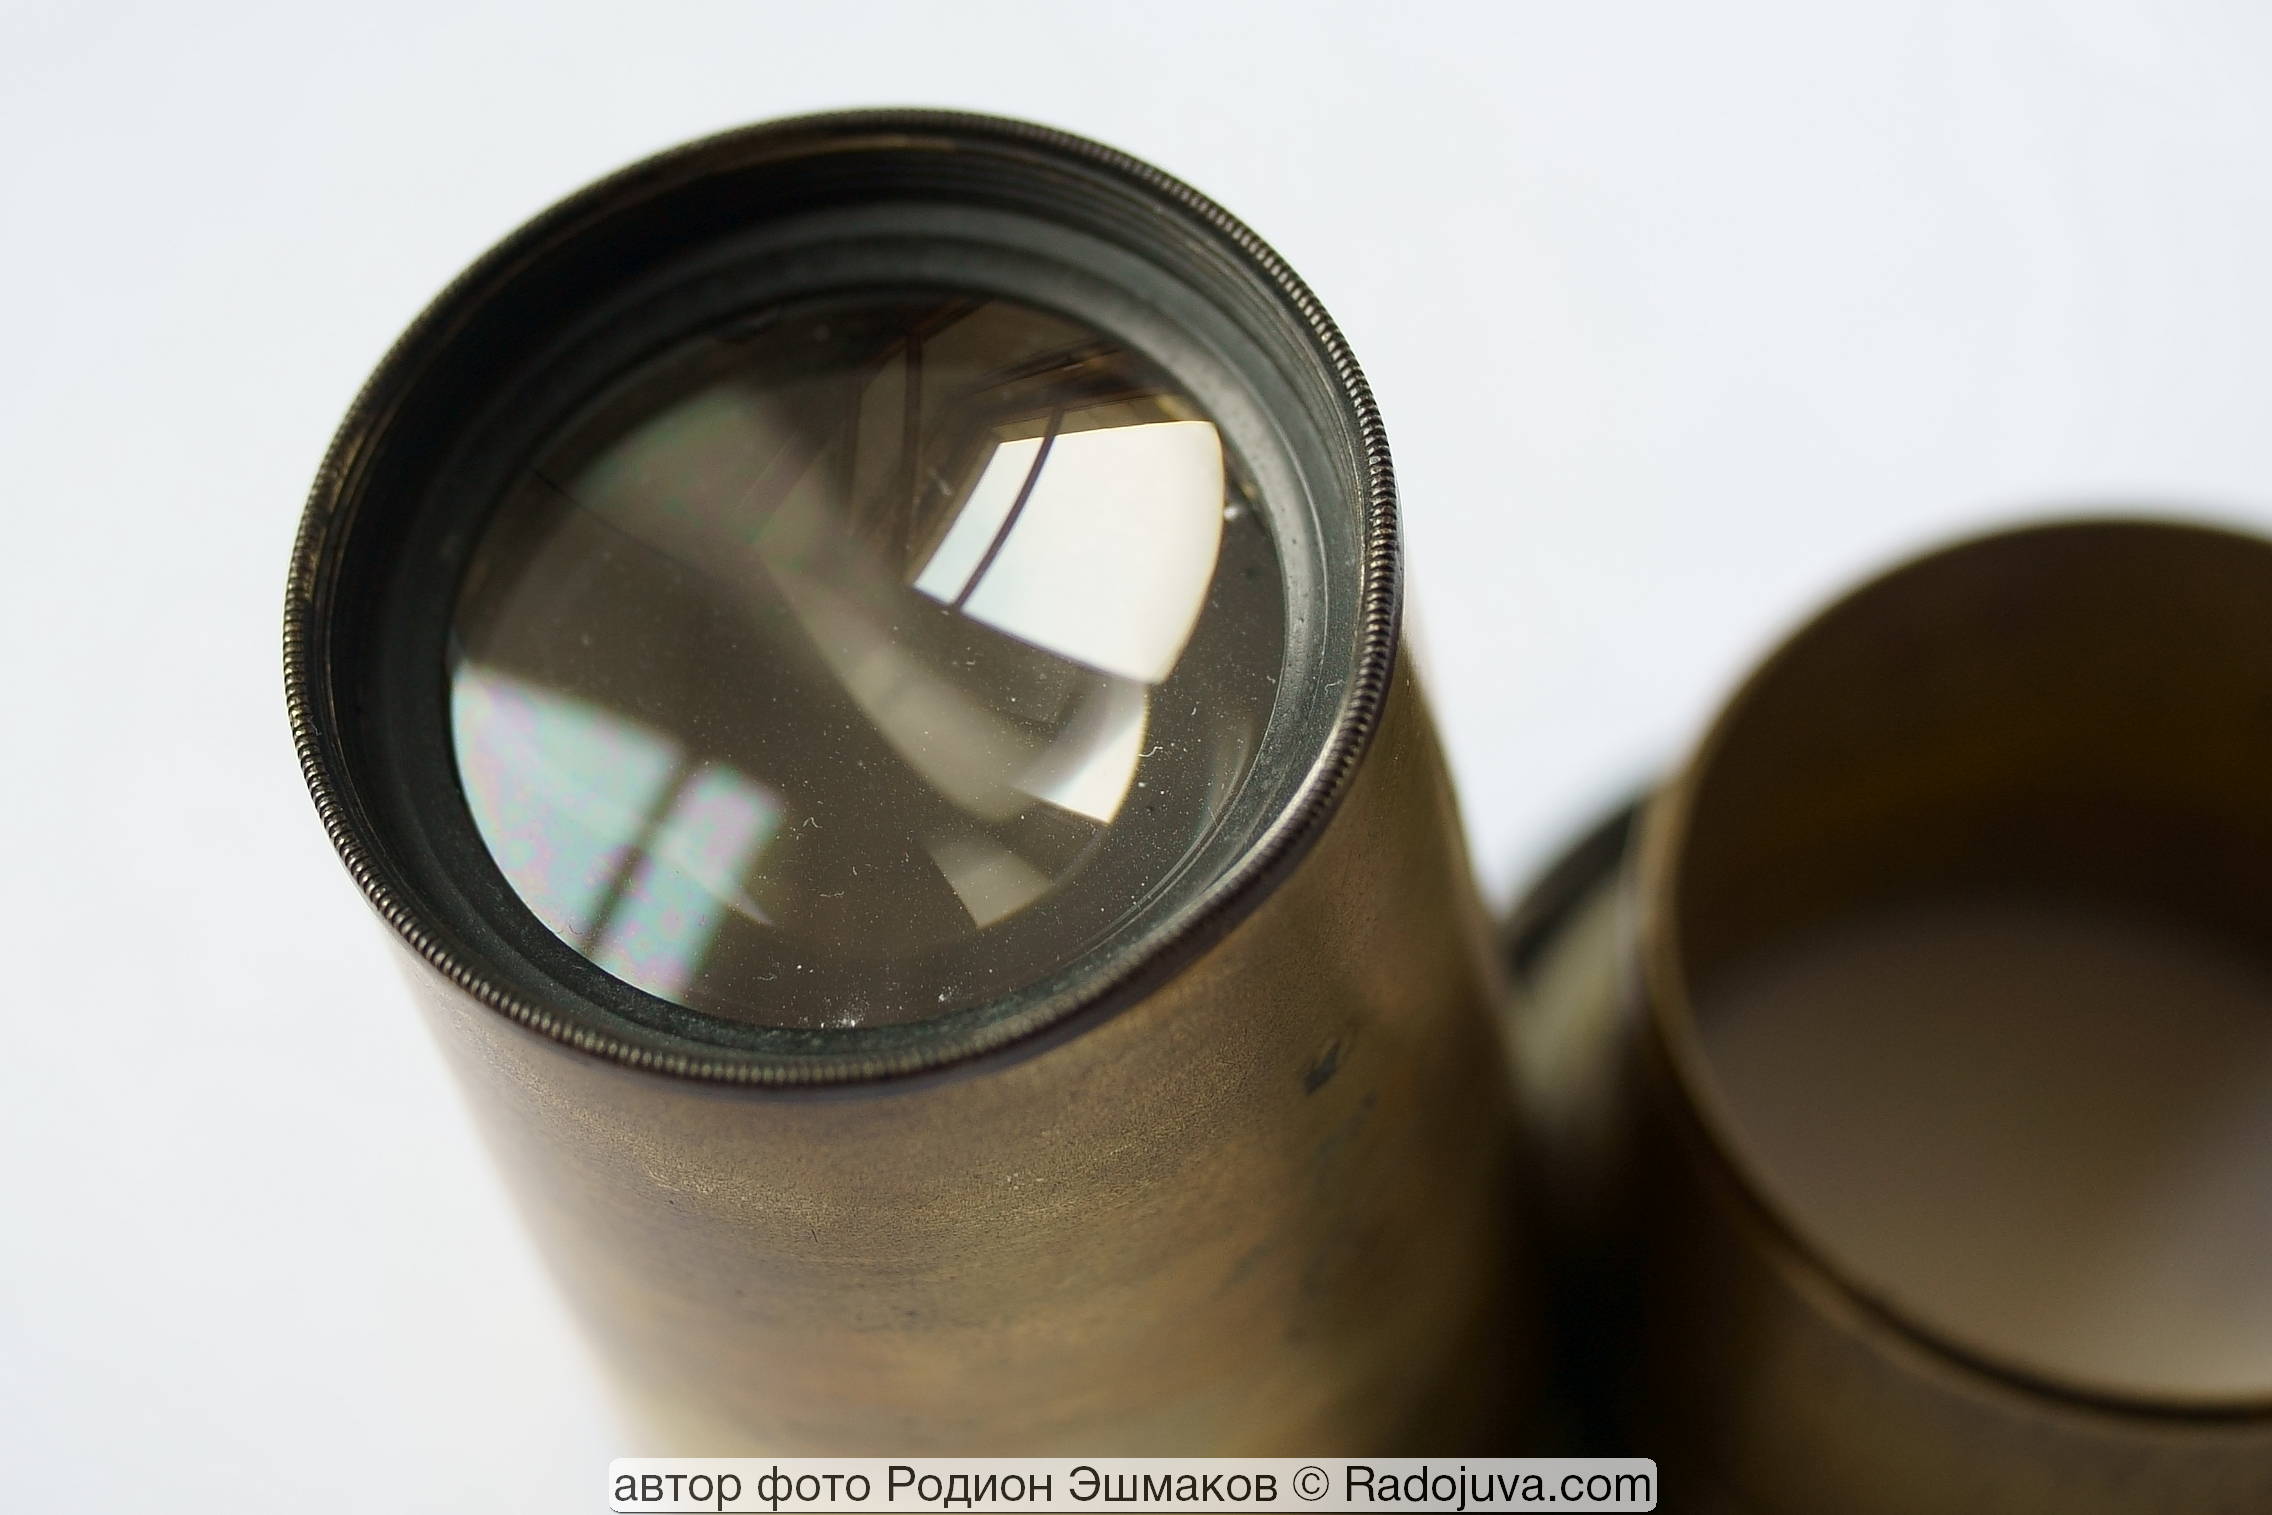 On closer inspection, you can see a thin rainbow film on the surface of the front lens.